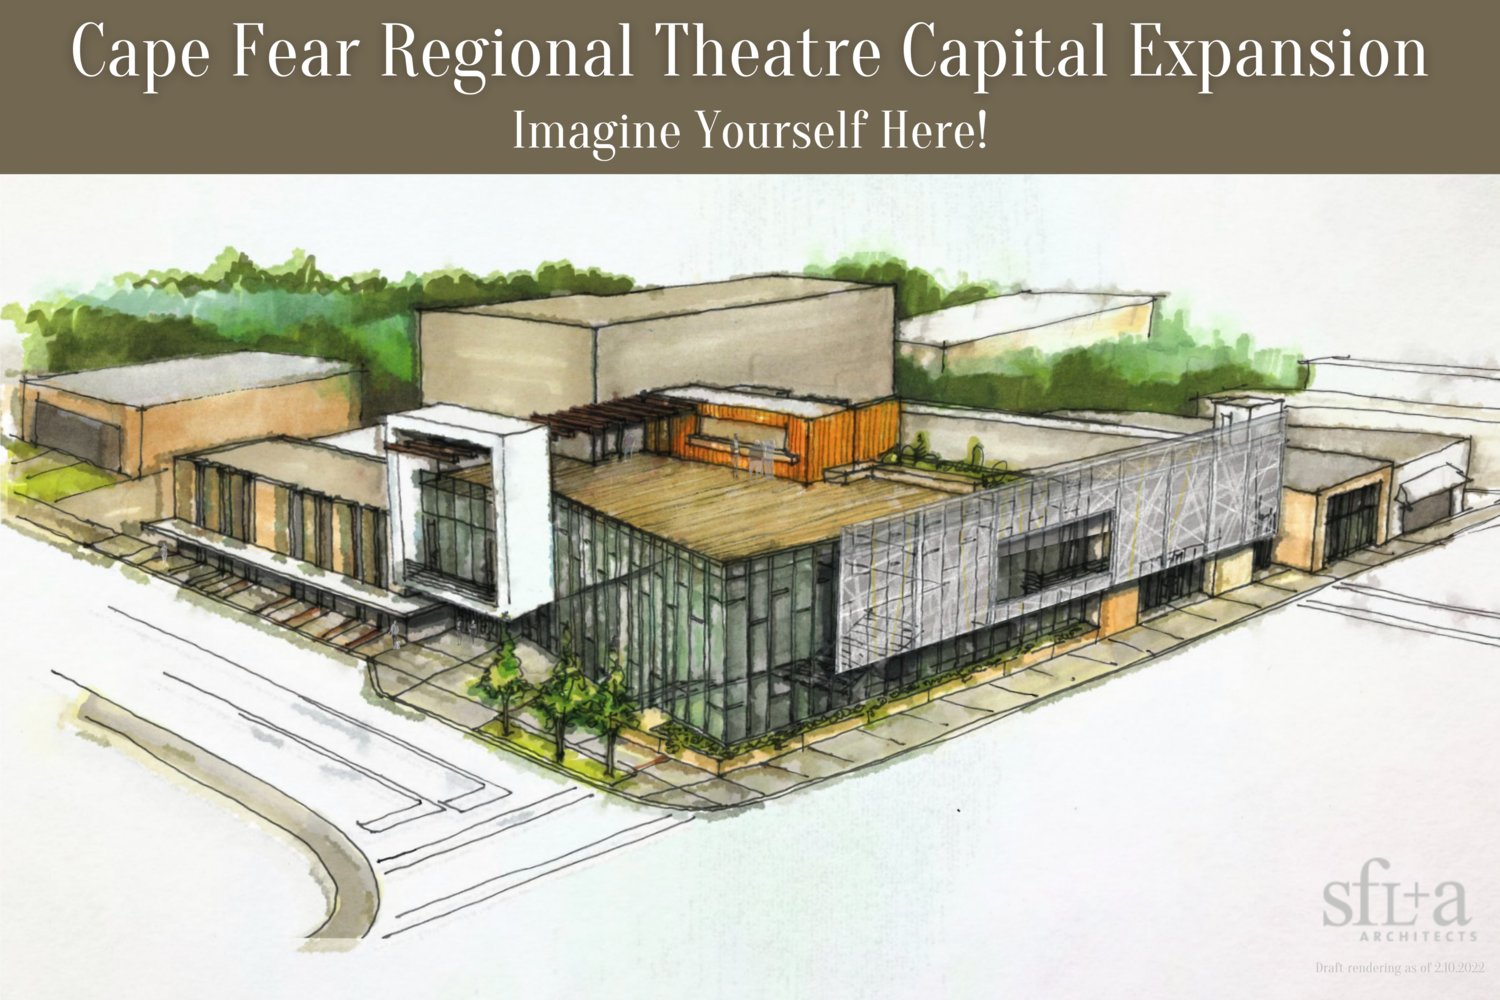 Cape Fear Regional Theatre is undergoing an estimated $16 million renovation and expansion that will upgrade and expand the building for decades to come. This is an artist's rendering of the second phase of the project.